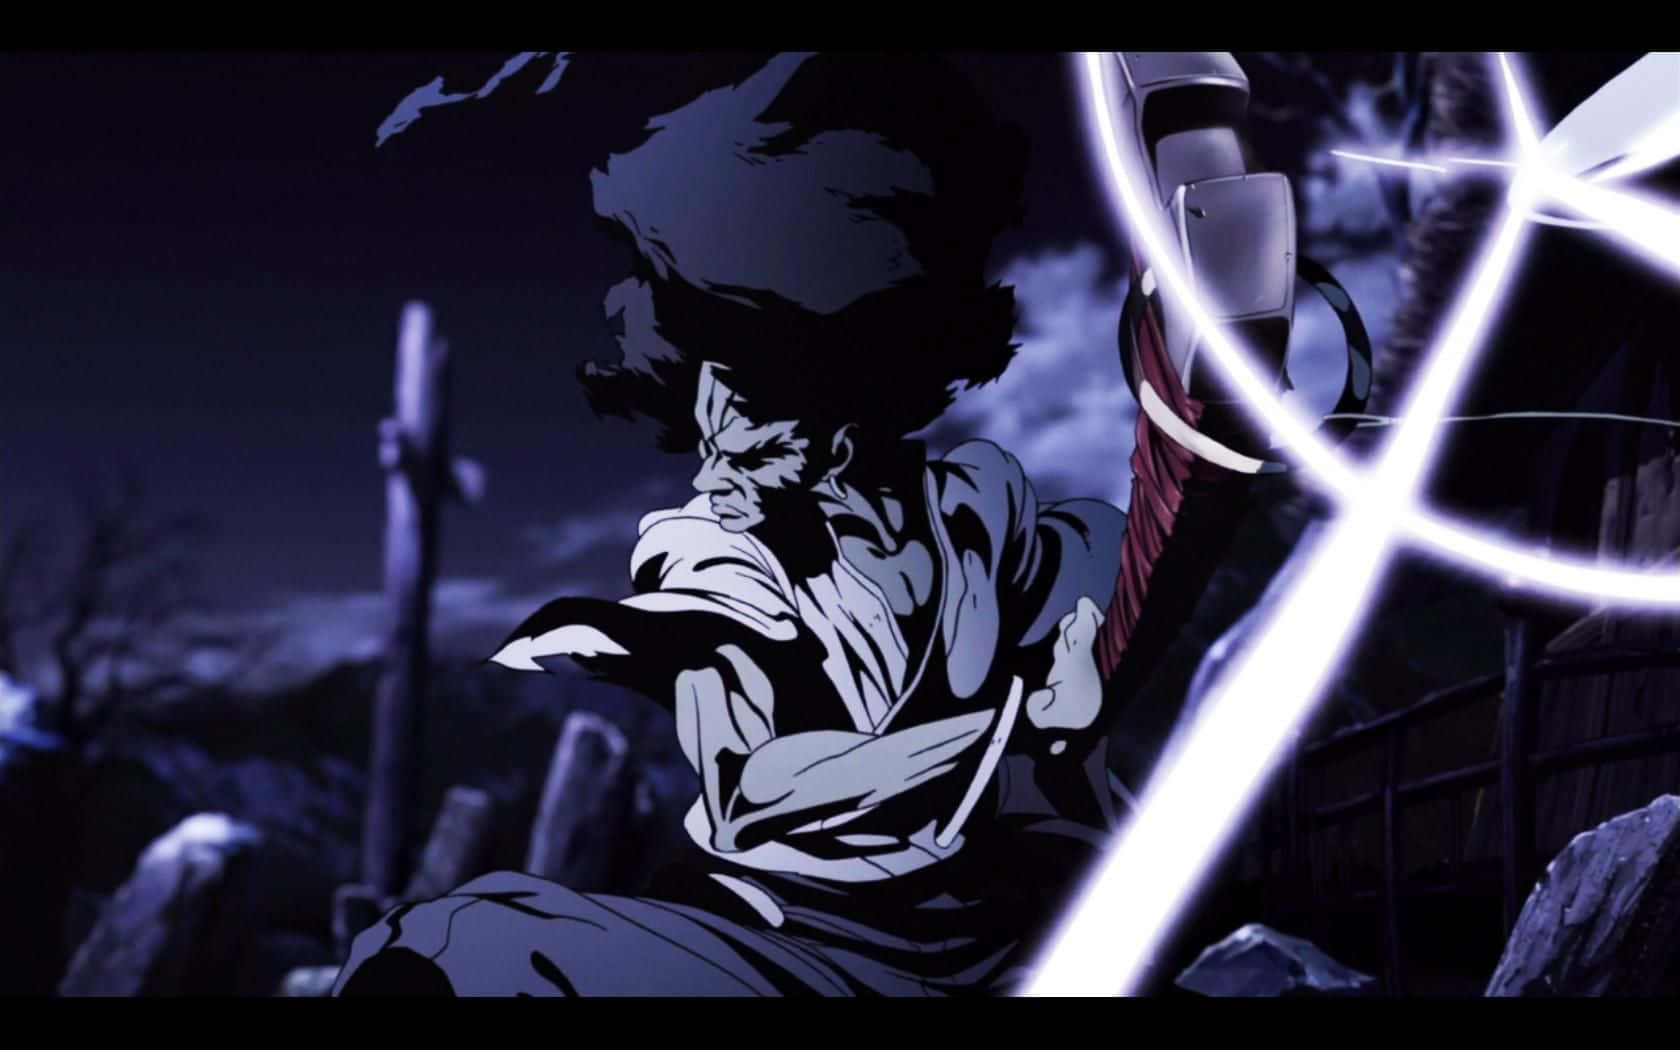 Afro Samurai battles atop a mountain with a fierce expression on his face Wallpaper